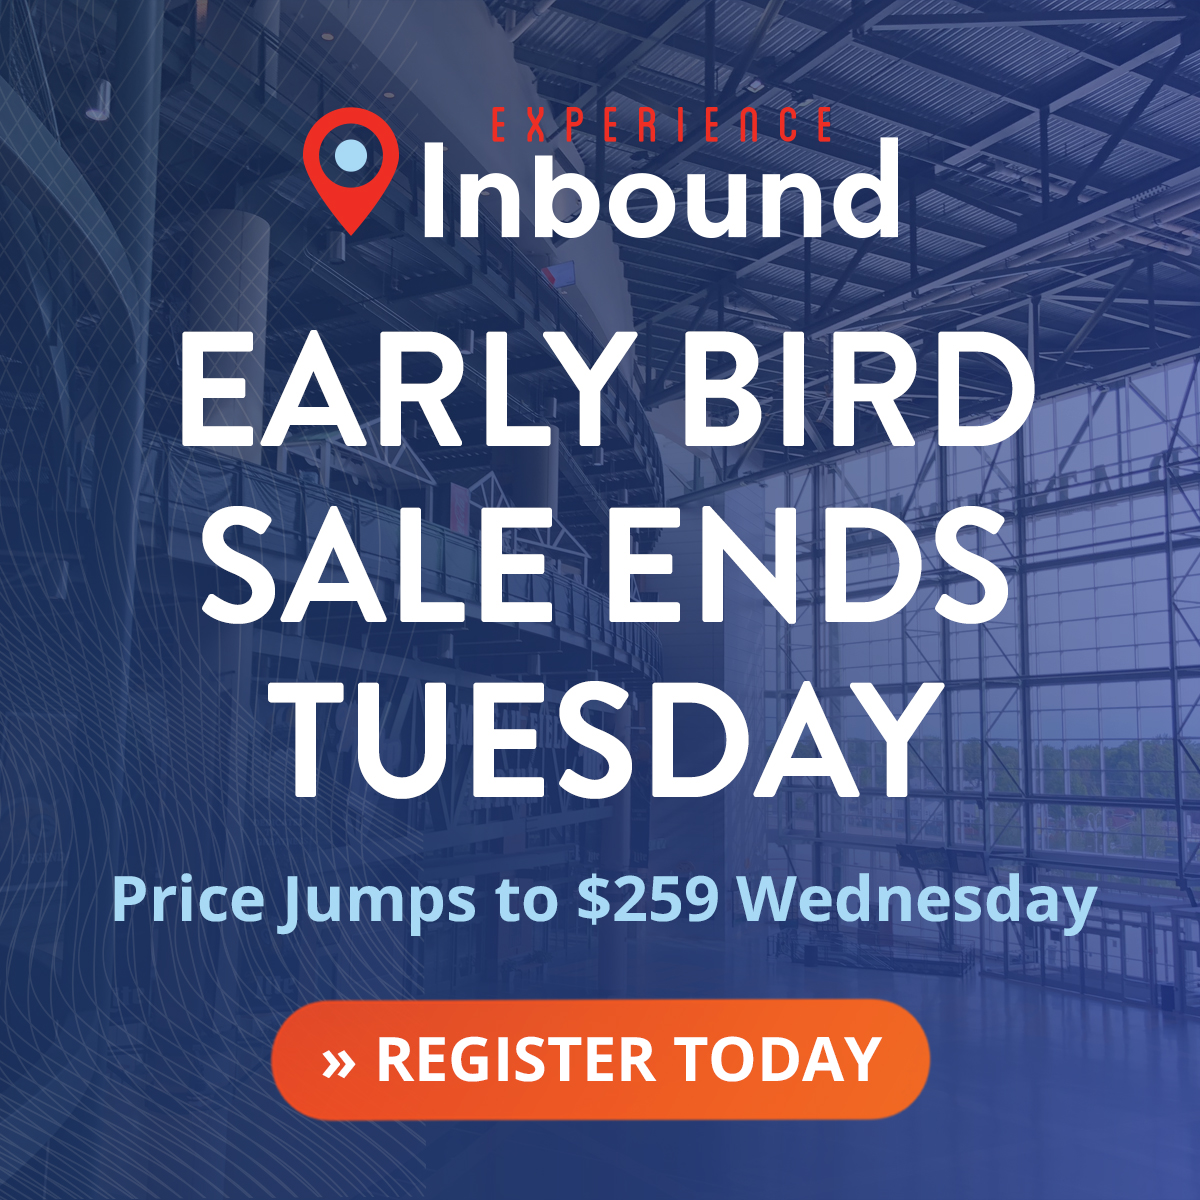 📣 Calling all #marketing and #sales professionals! This is your last chance to get your tickets for $219, so save your seats today! hubs.ly/Q01BYTd50 #ExpInbound #MarketingConference #MKEevents #GreenBayEvents